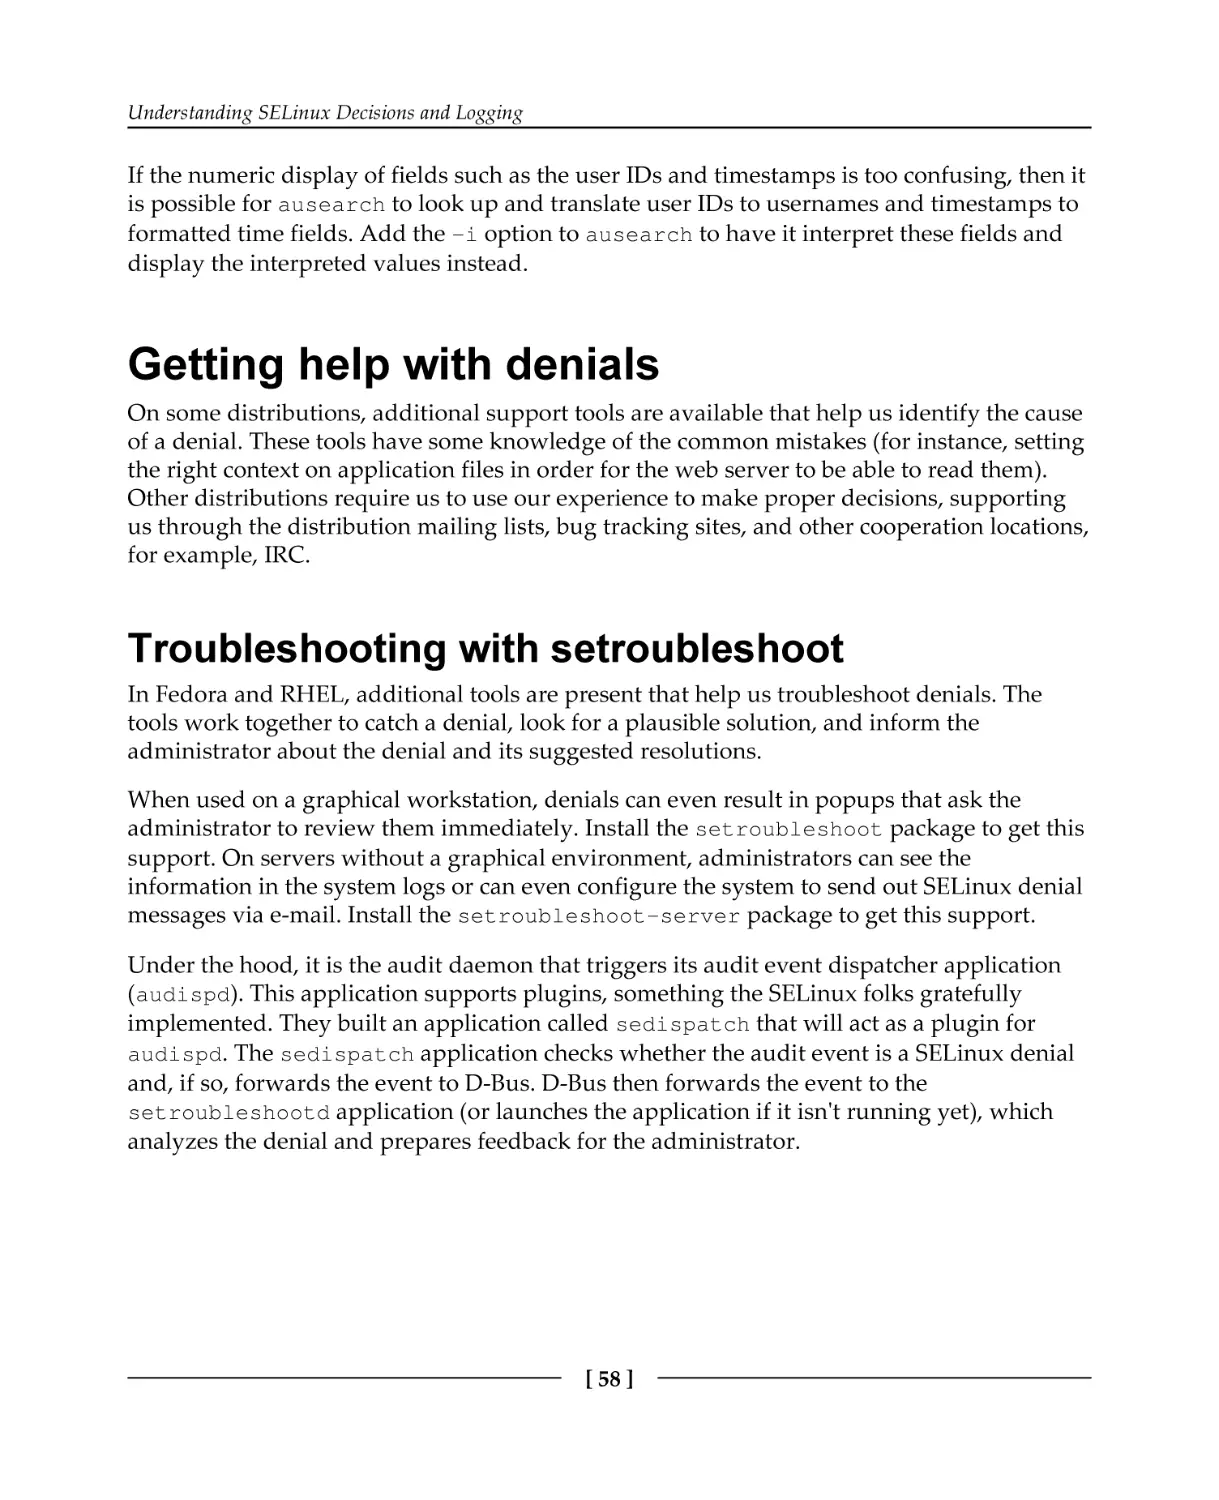 Getting help with denials
Troubleshooting with setroubleshoot